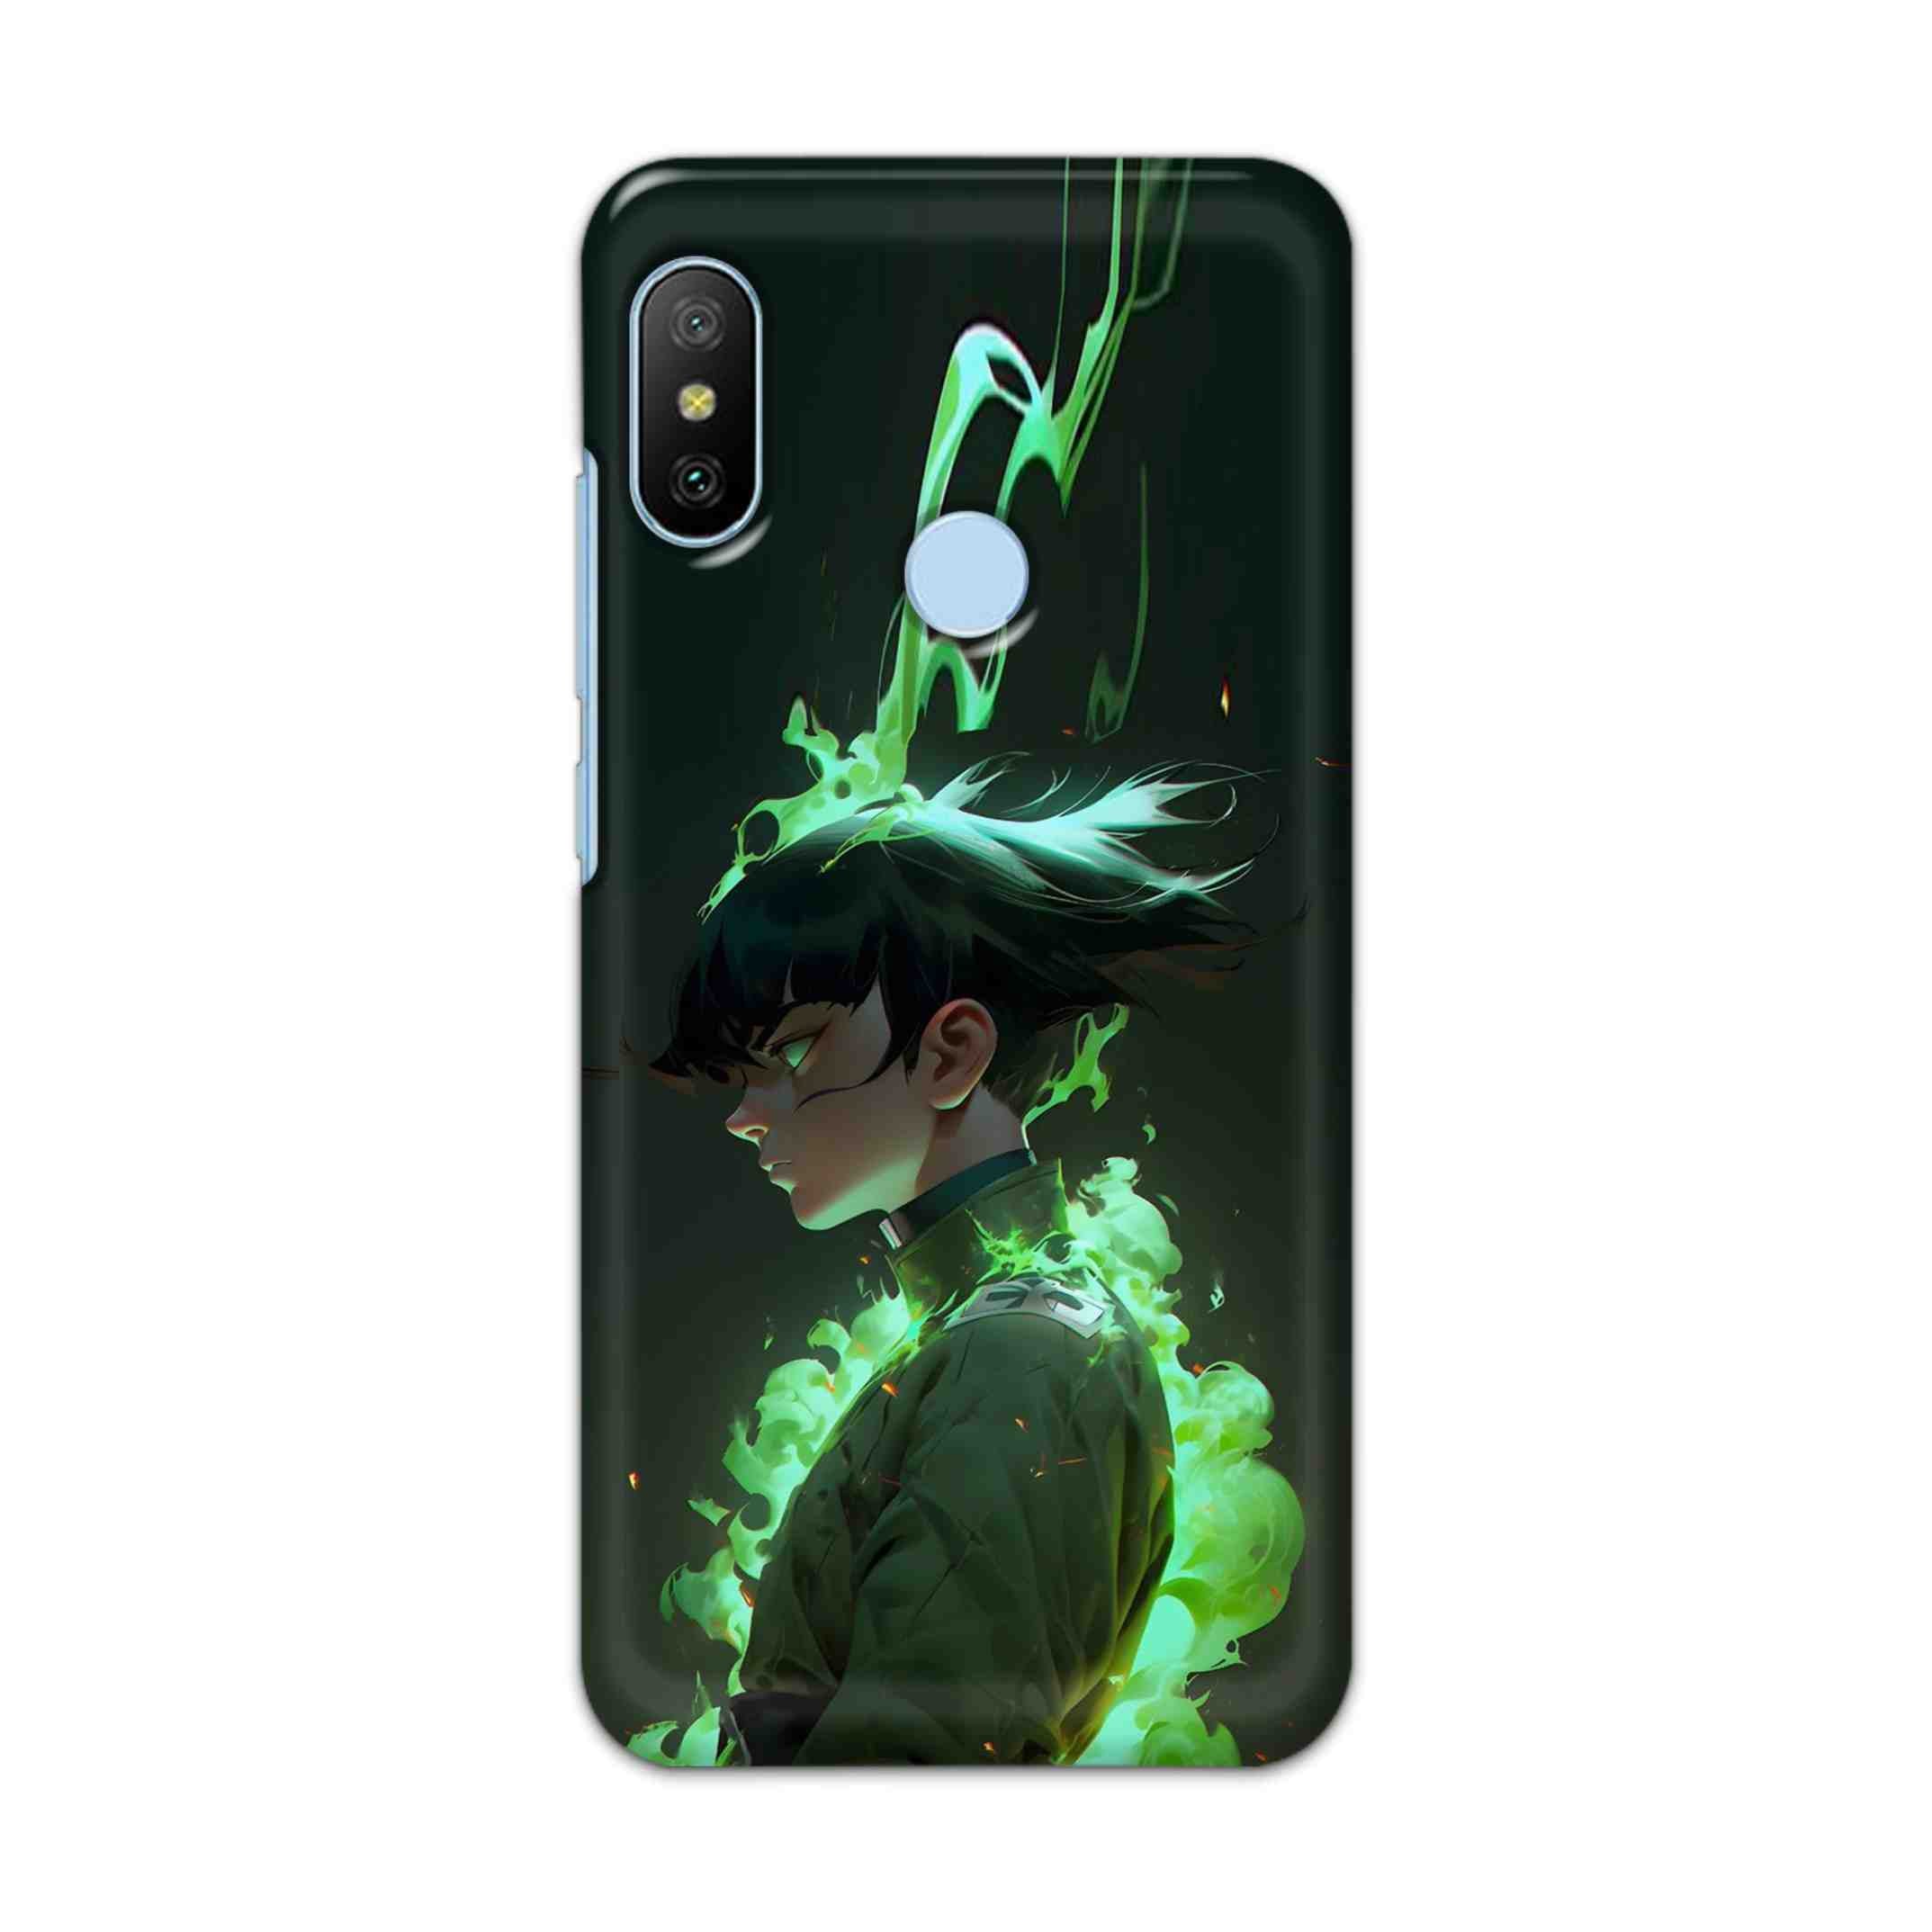 Buy Akira Hard Back Mobile Phone Case/Cover For Xiaomi Redmi 6 Pro Online